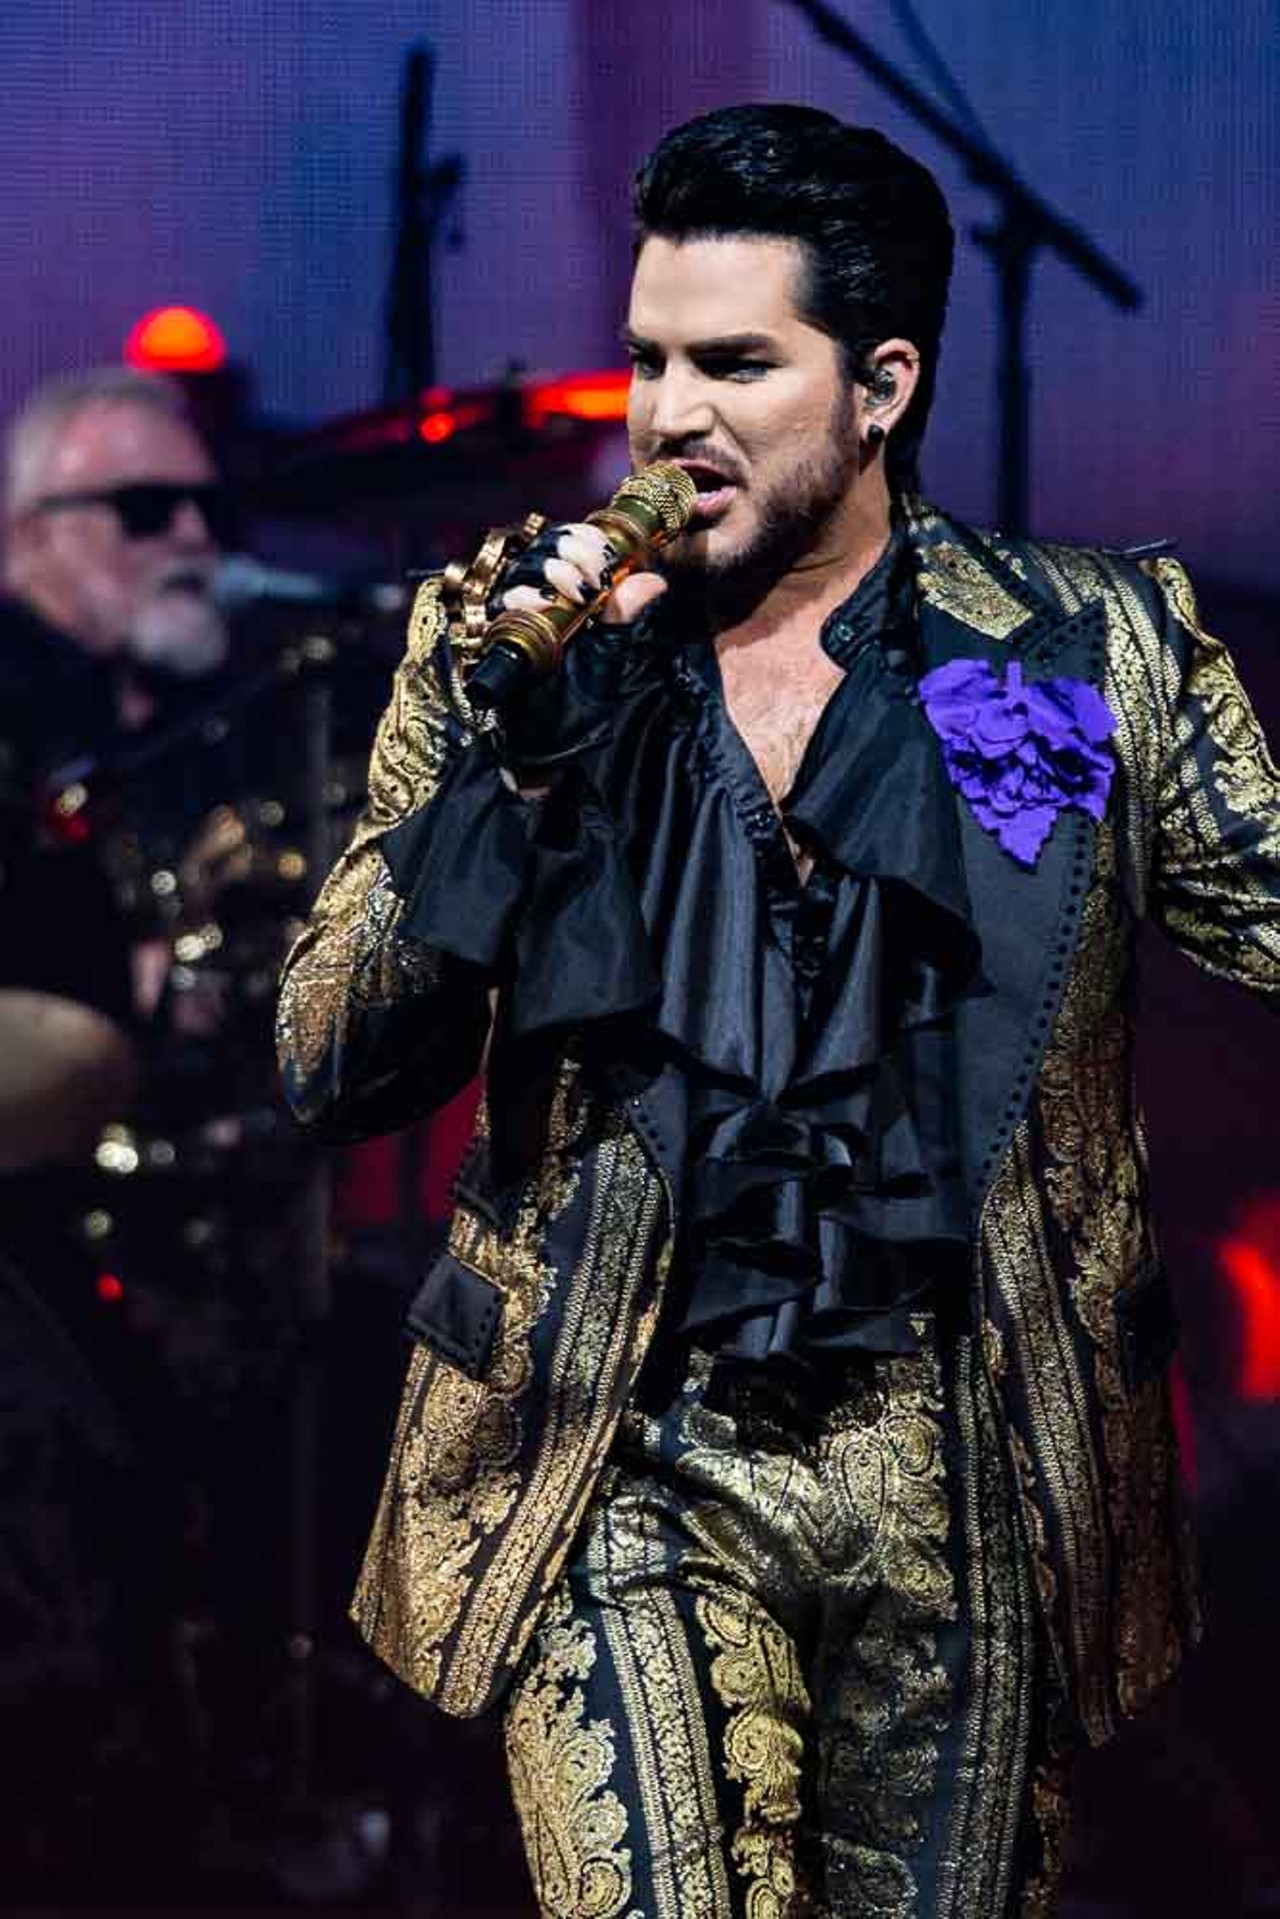 All the Photos from Queen + Adam Lambert's Performance at Columbus' Nationwide Arena